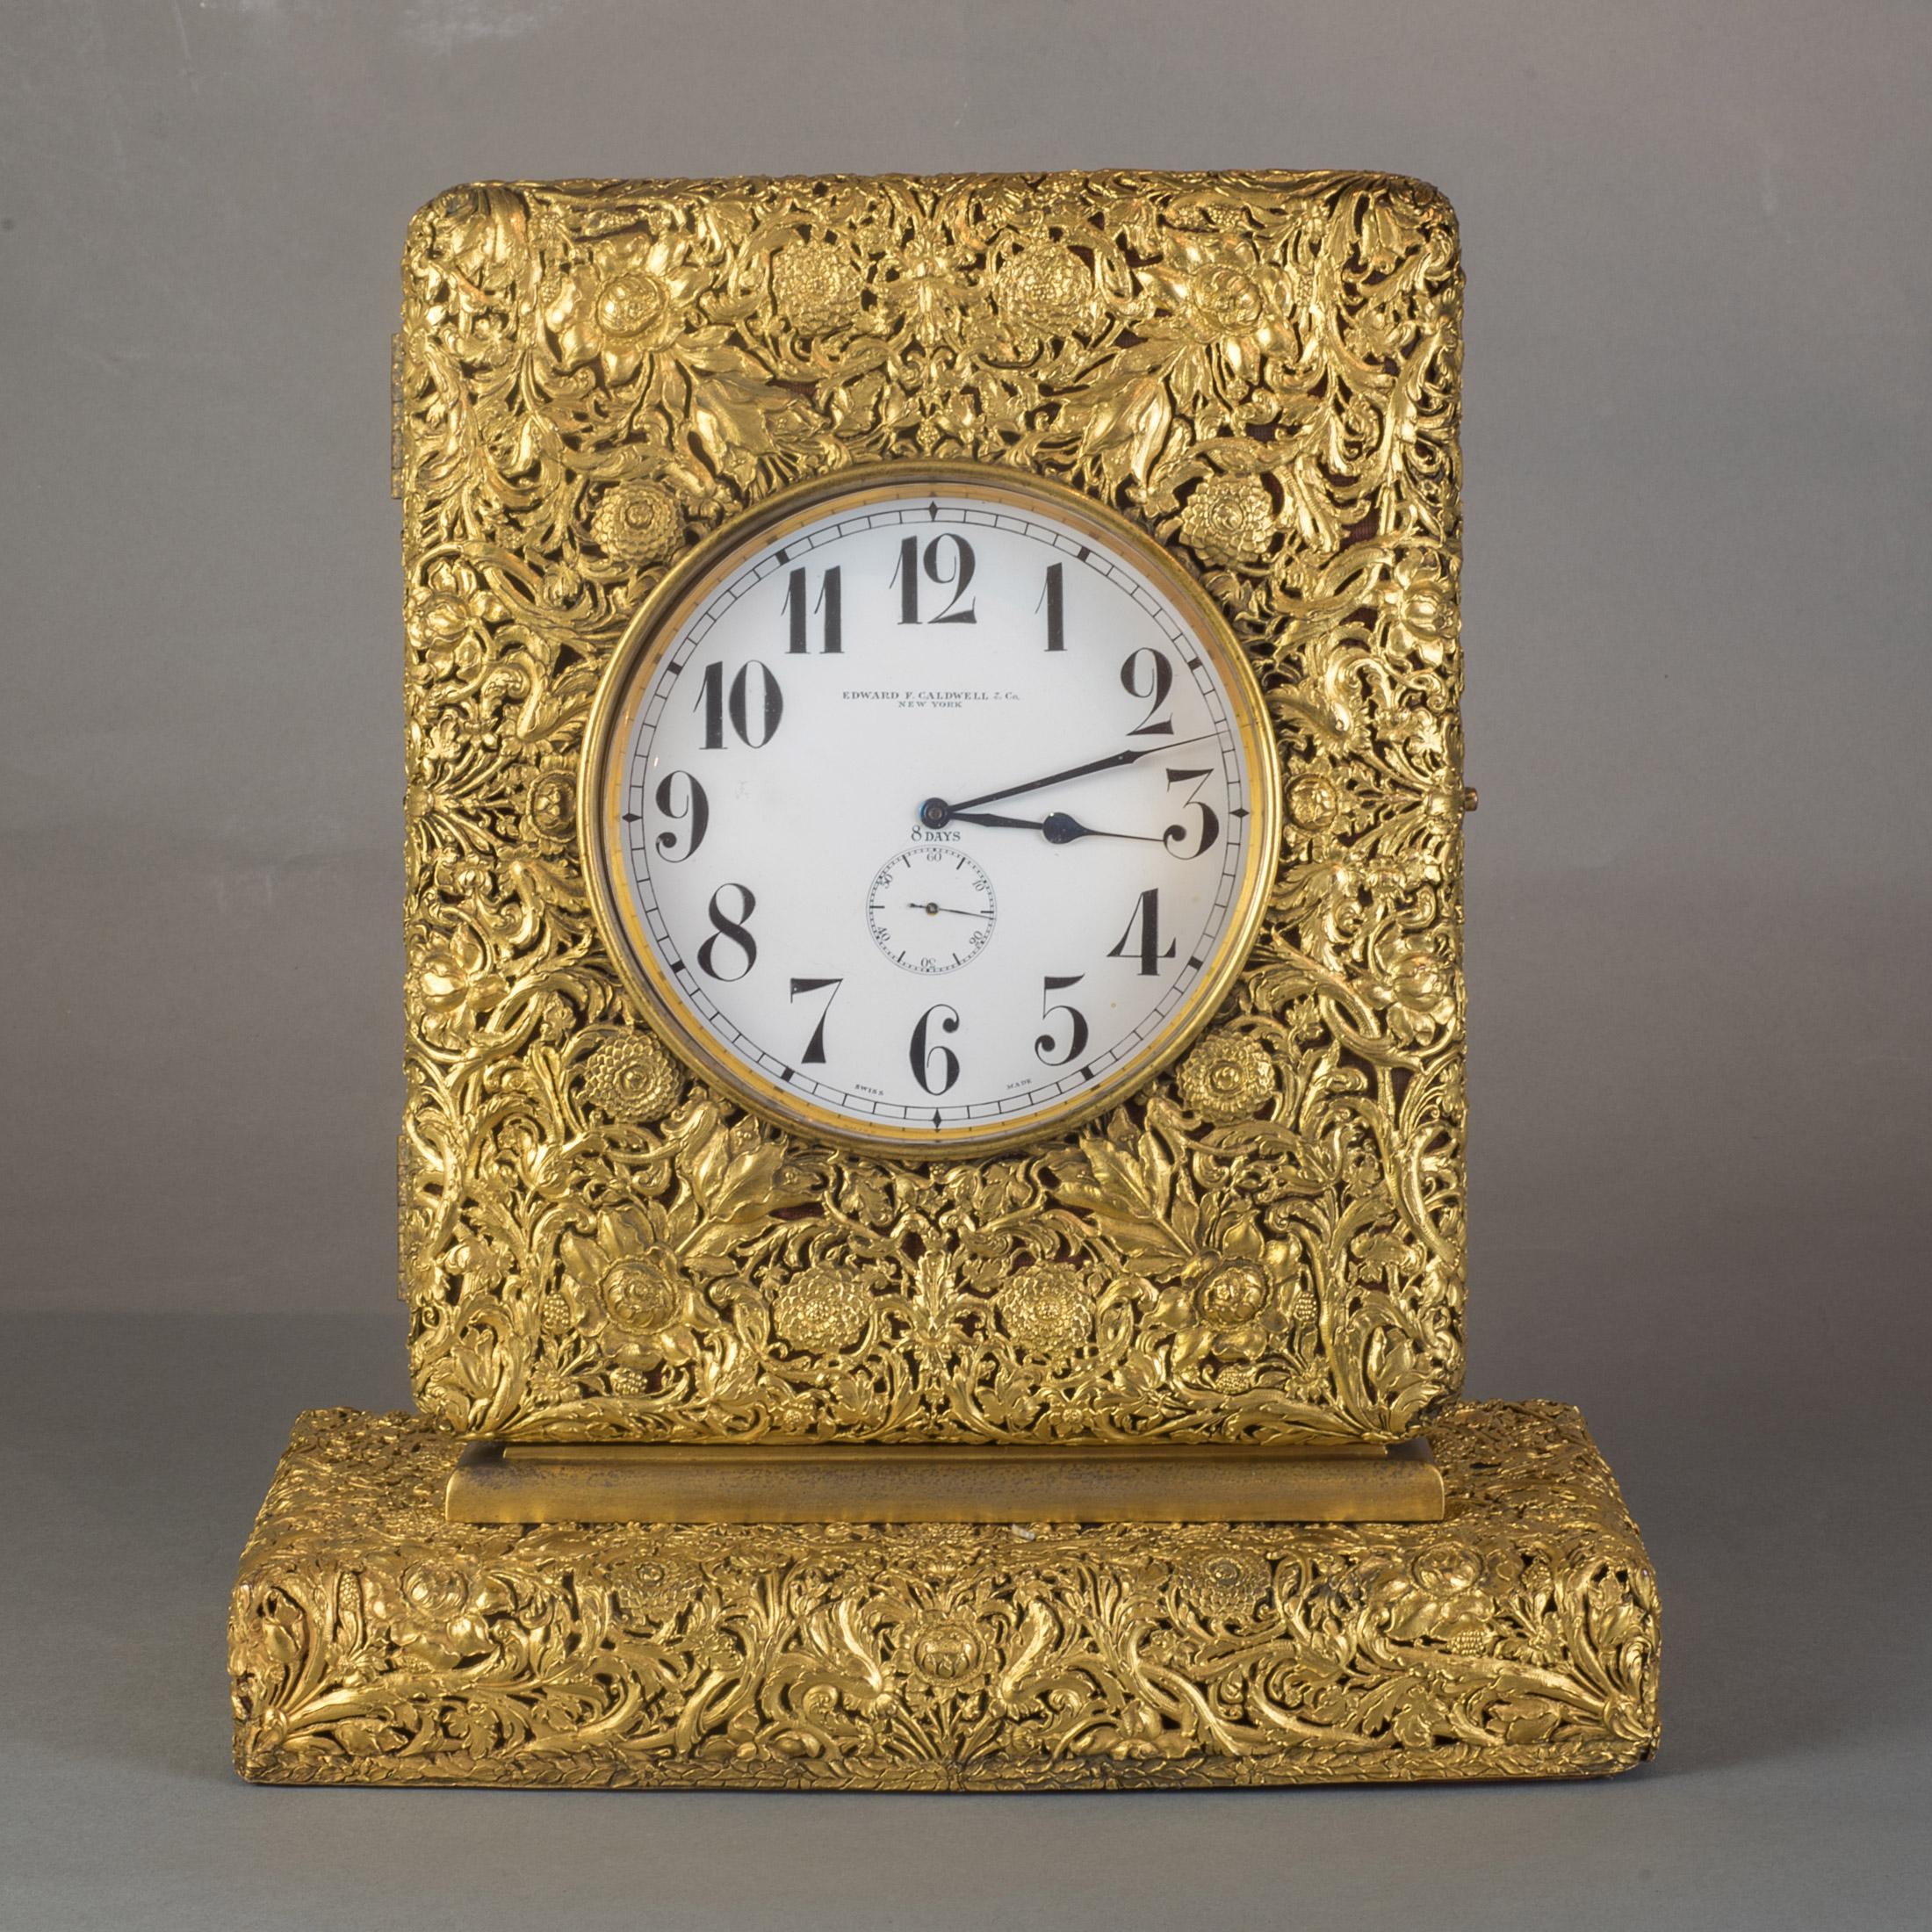 Antique chased Ormolu clock case ornamented with hand pierced all over foliate pattern scrollwork, achieved through repousse and engraving, enclosing a pocket watch-style clock bearing Edward F. Caldwell on the clock face. A silver oversized pocket